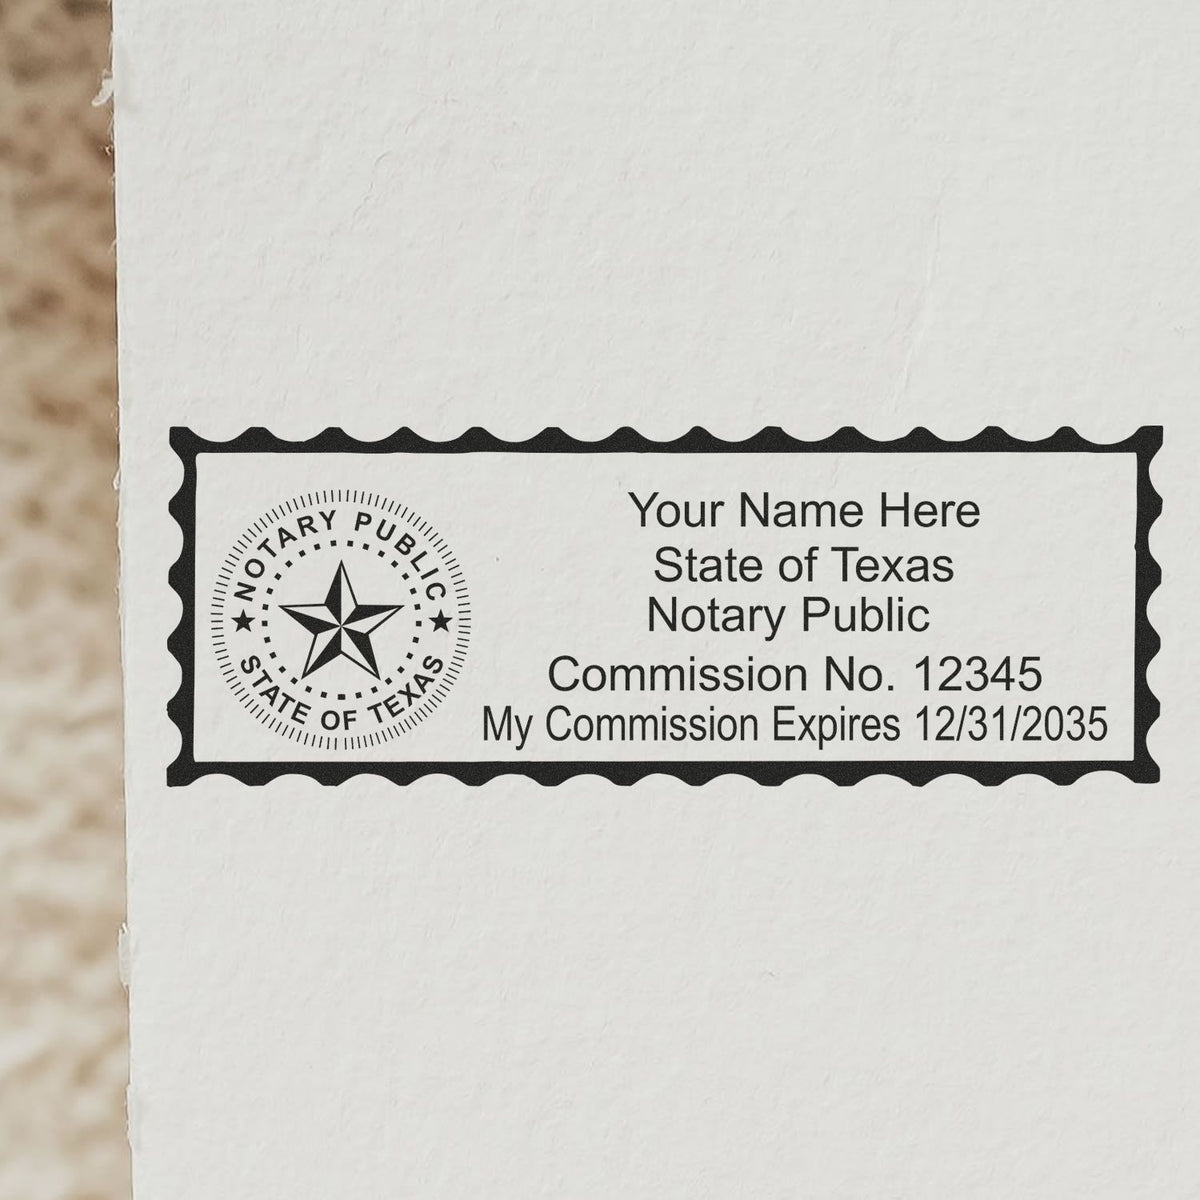 A lifestyle photo showing a stamped image of the Heavy-Duty Texas Rectangular Notary Stamp on a piece of paper